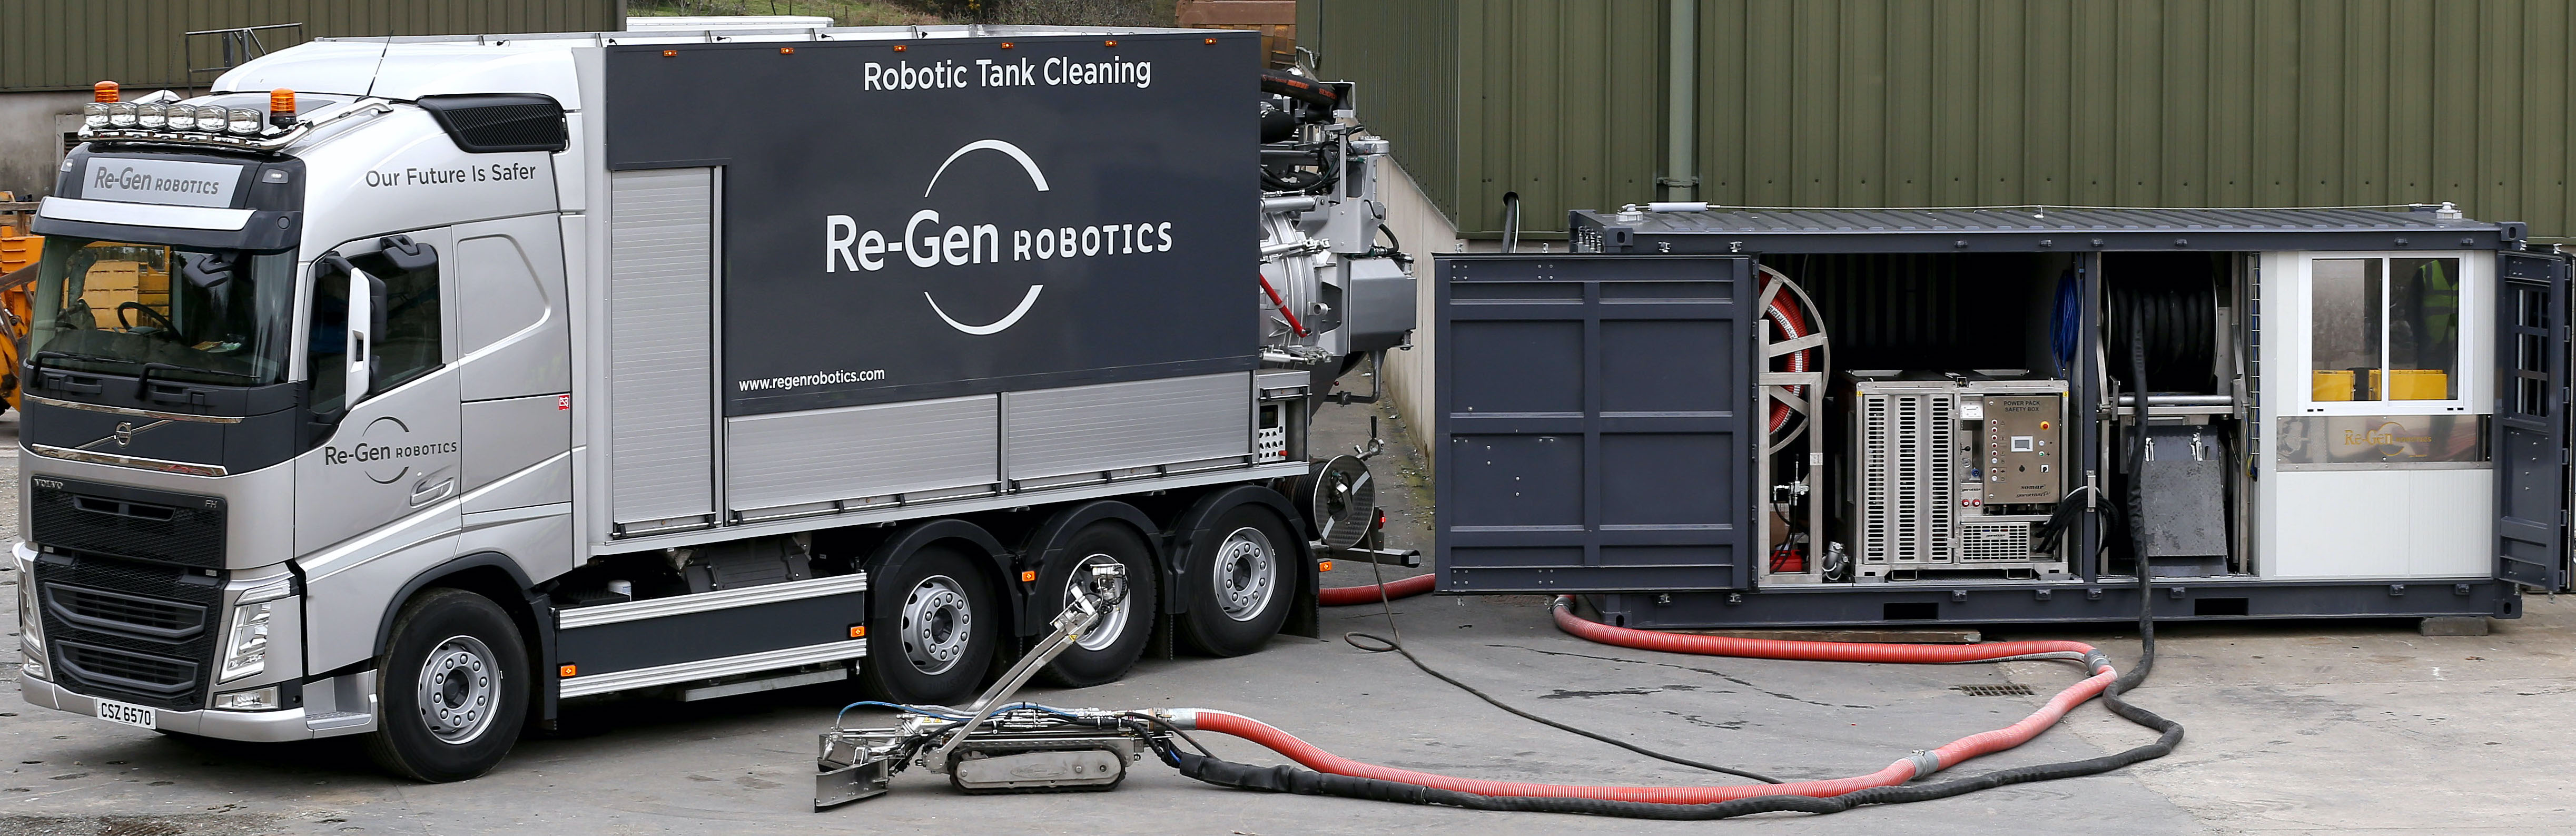 Re-Gen Robotics’ no man entry tank cleaning service provides huge logistics cost and risk benefits for tank owners